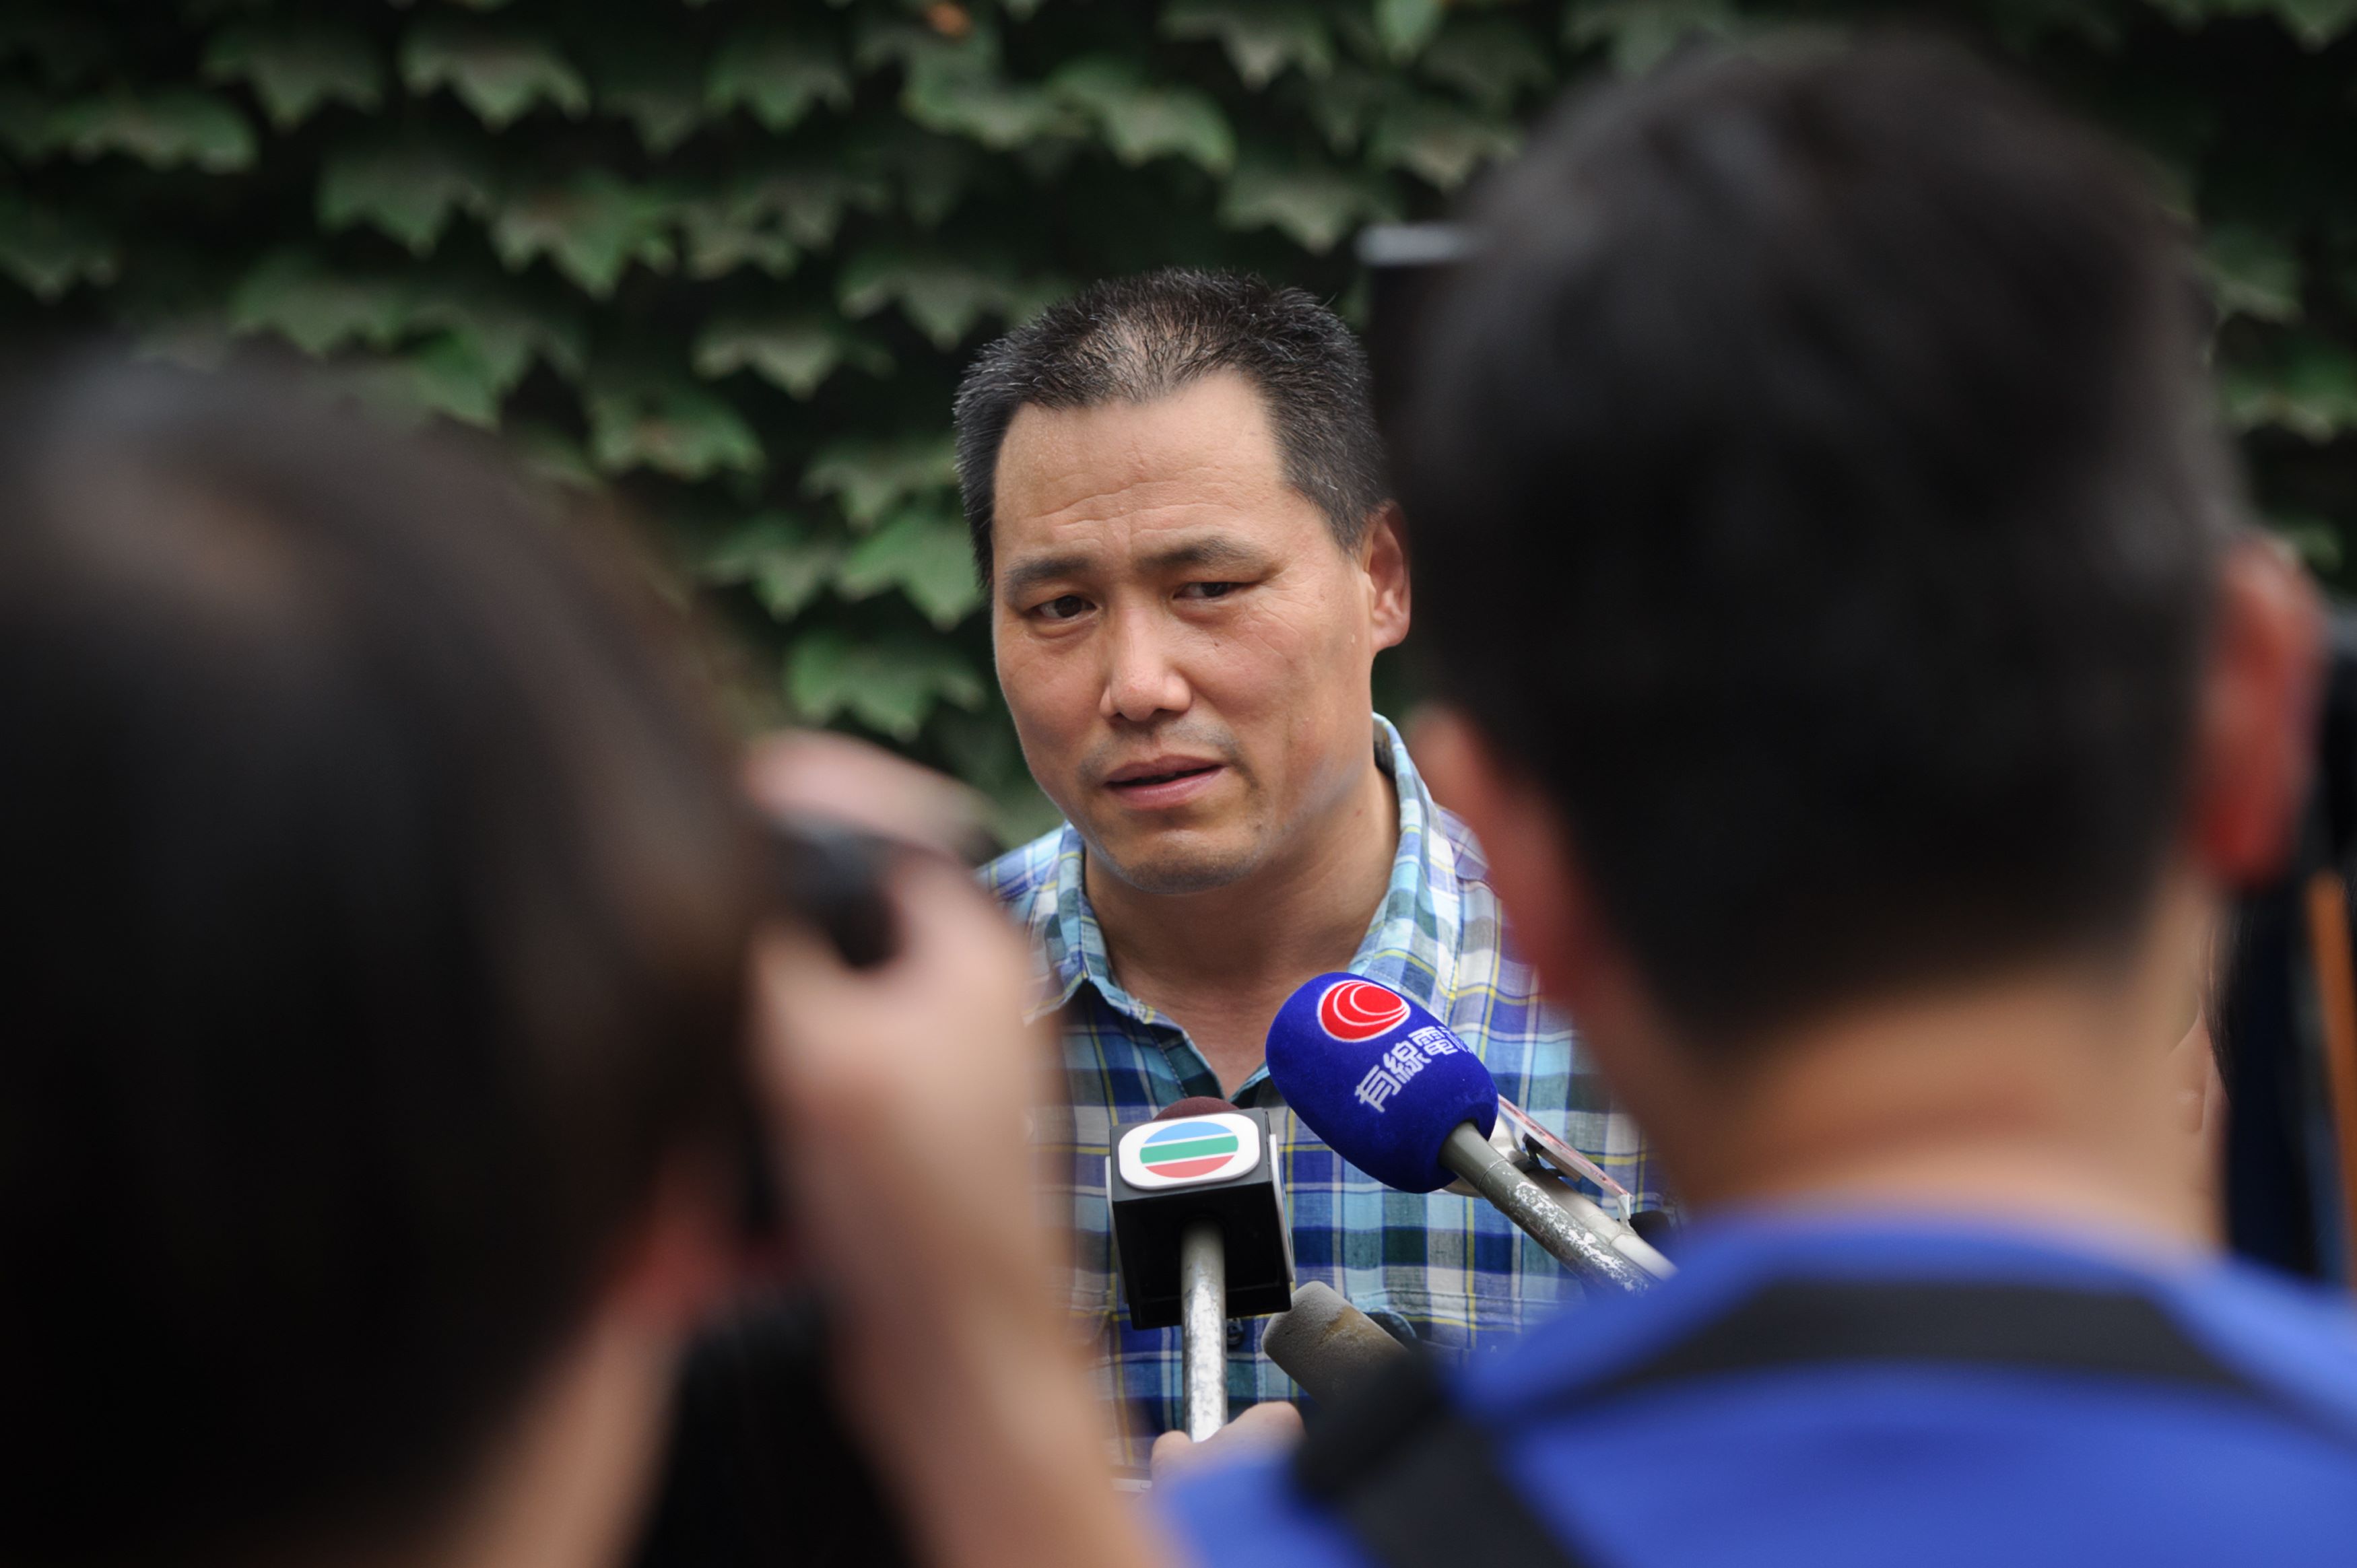 In a photo taken on July 20, 2012 human rights lawyer Pu Zhiqiang (C) talks to the media at the compound of dissident artist Ai Weiwei in the Caochangdi district of Beijing. One of China's most celebrated human rights lawyers went on trial December 14, 2015 over online comments critical of the ruling Communist Party, as police scuffled with supporters and journalists gathered outside the courthouse. Pu Zhiqiang, who has represented labour camp victims and dissident artist Ai Weiwei, was detained a year and a half ago in a nationwide crackdown on dissent. He faces a maximum of eight years in jail on charges of "inciting ethnic hatred" and "picking quarrels and provoking trouble", according to his lawyer Mo Shaoping. AFP PHOTO / Ed Jones